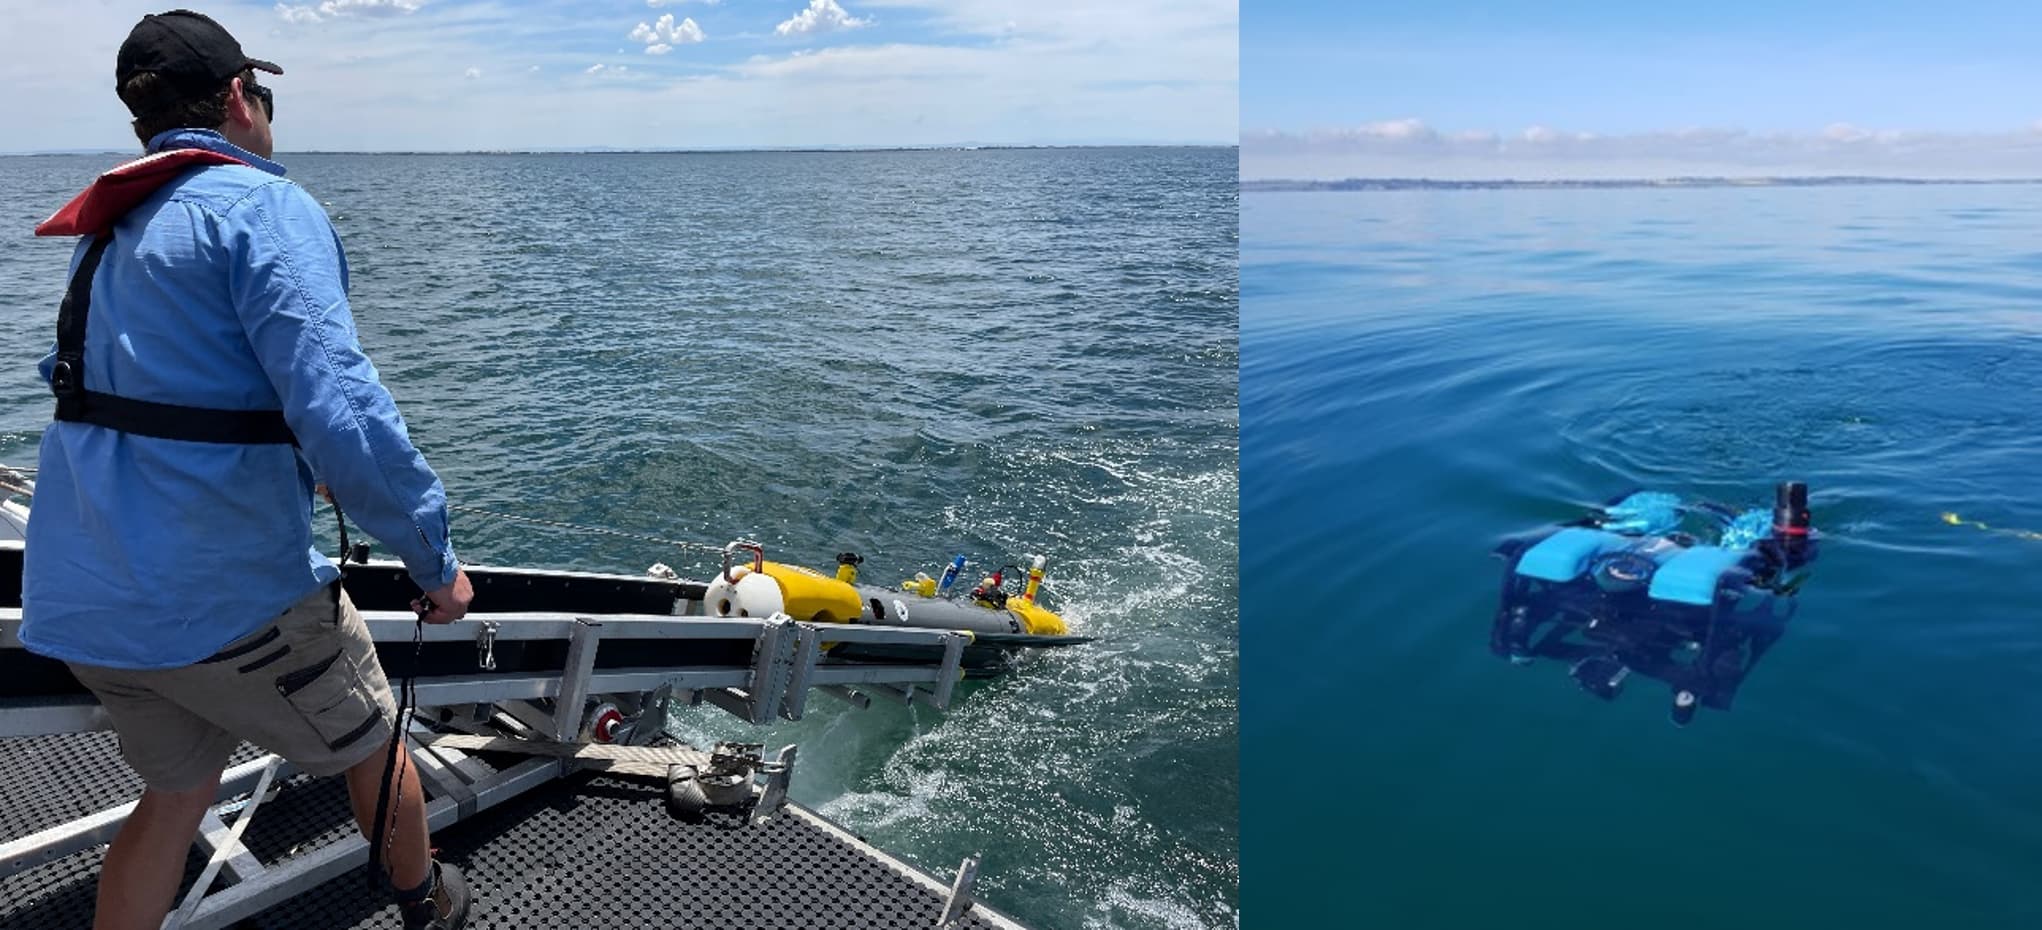 The AUV being deployed to complete automated underwater imaging surveys and ROV operated underwater